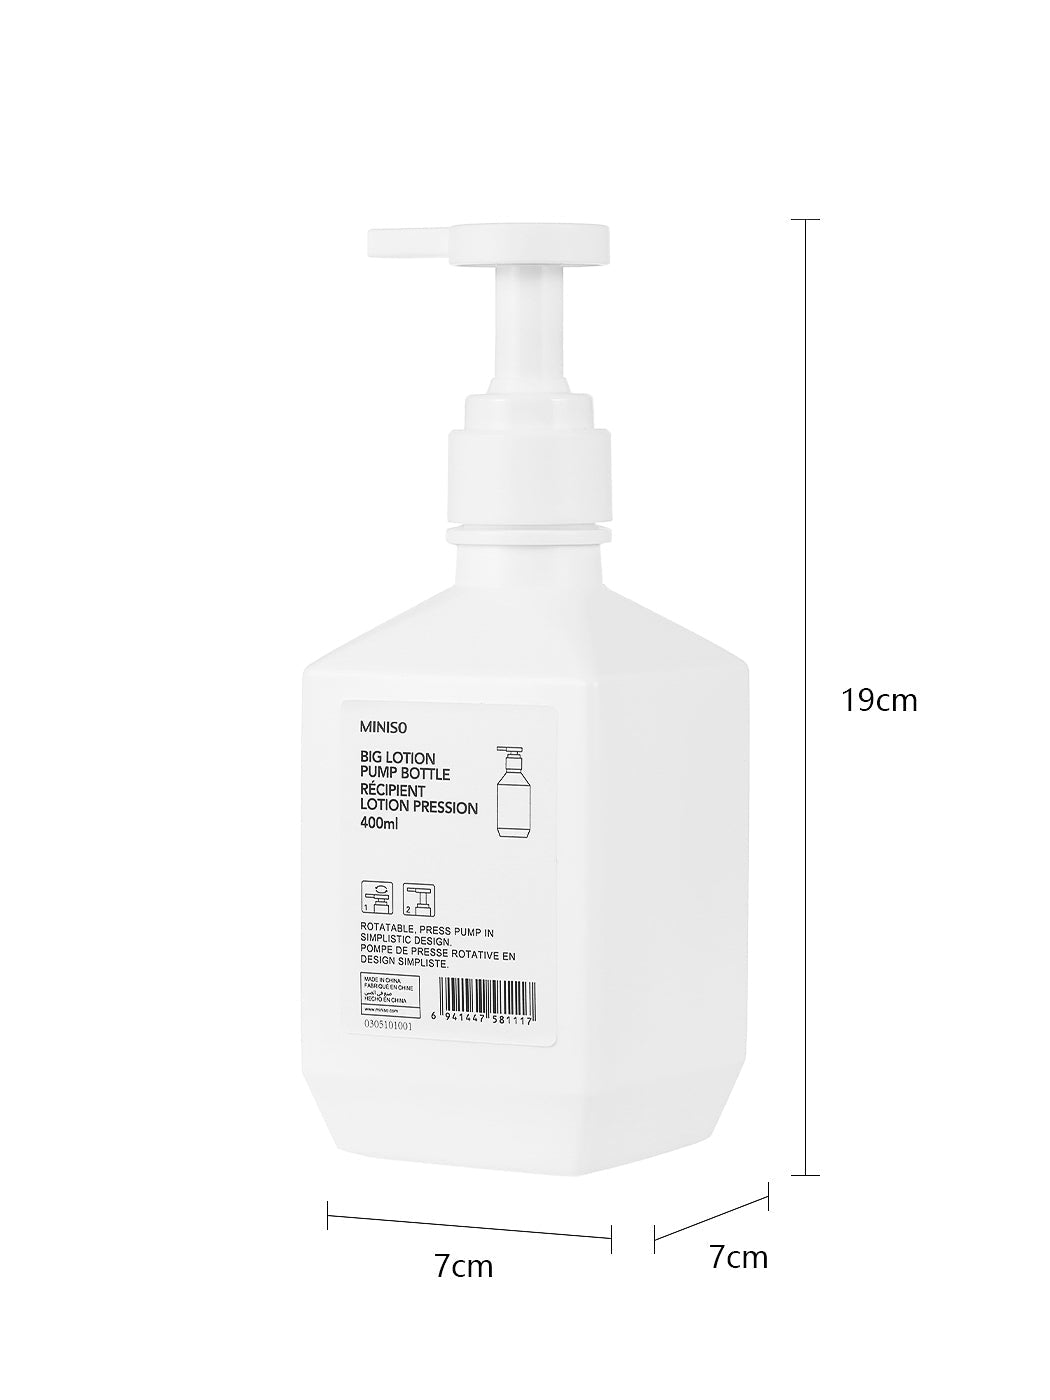 MINISO LARGE PRESS-TYPE LOTION CONTAINER 400ML 2010216210108 BATHROOM SUPPLIES-8